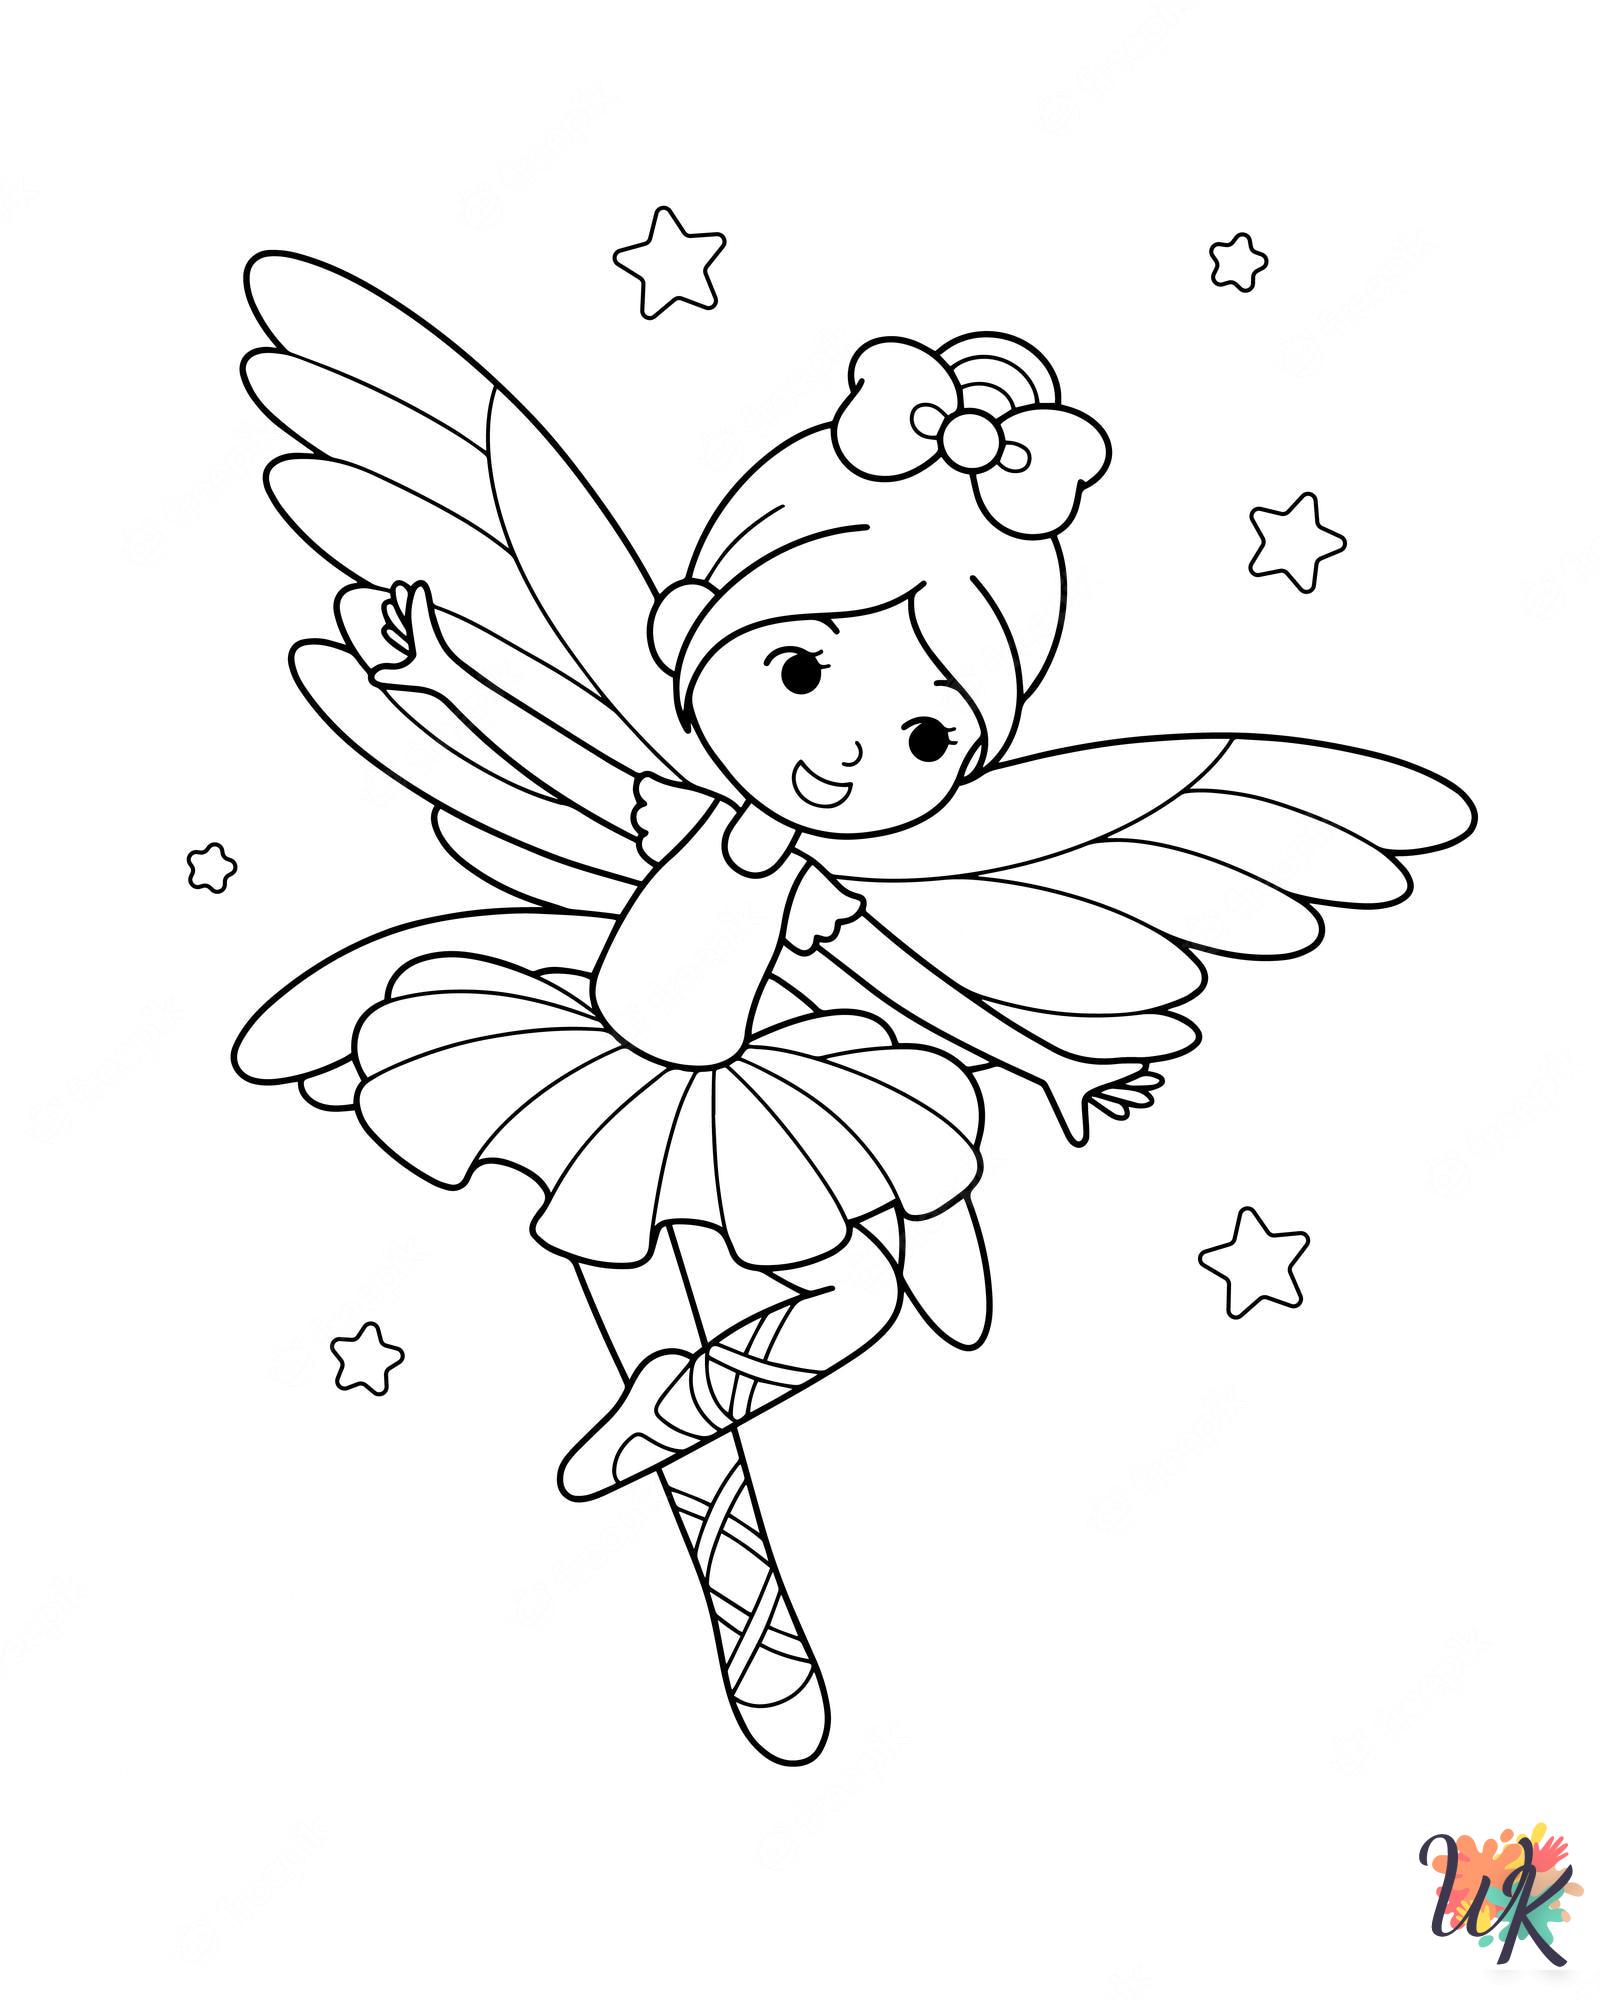 Ballerina coloring pages easy 1